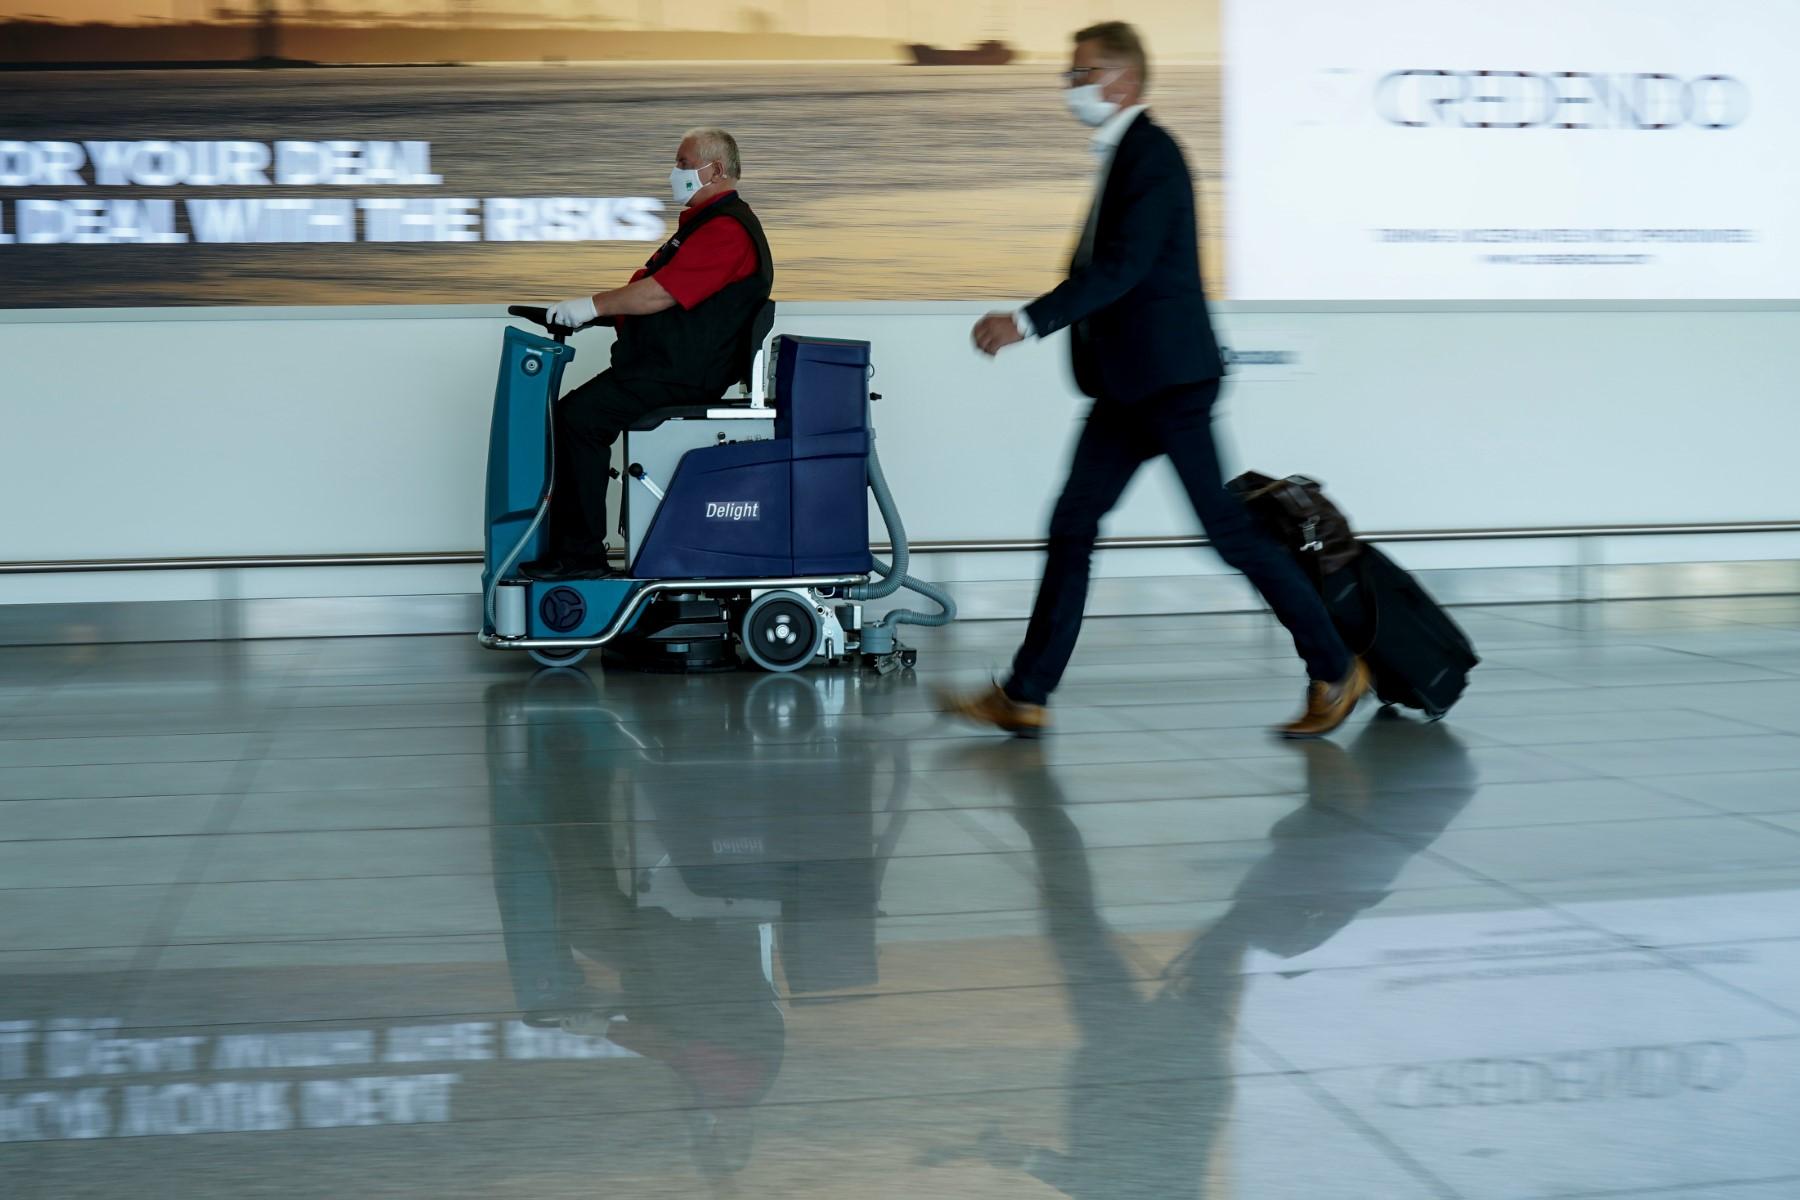 An employee of Brussels airport cleans up the floor at Brussels Airport, in Zaventem, on June 15, 2020. Photo: AFP